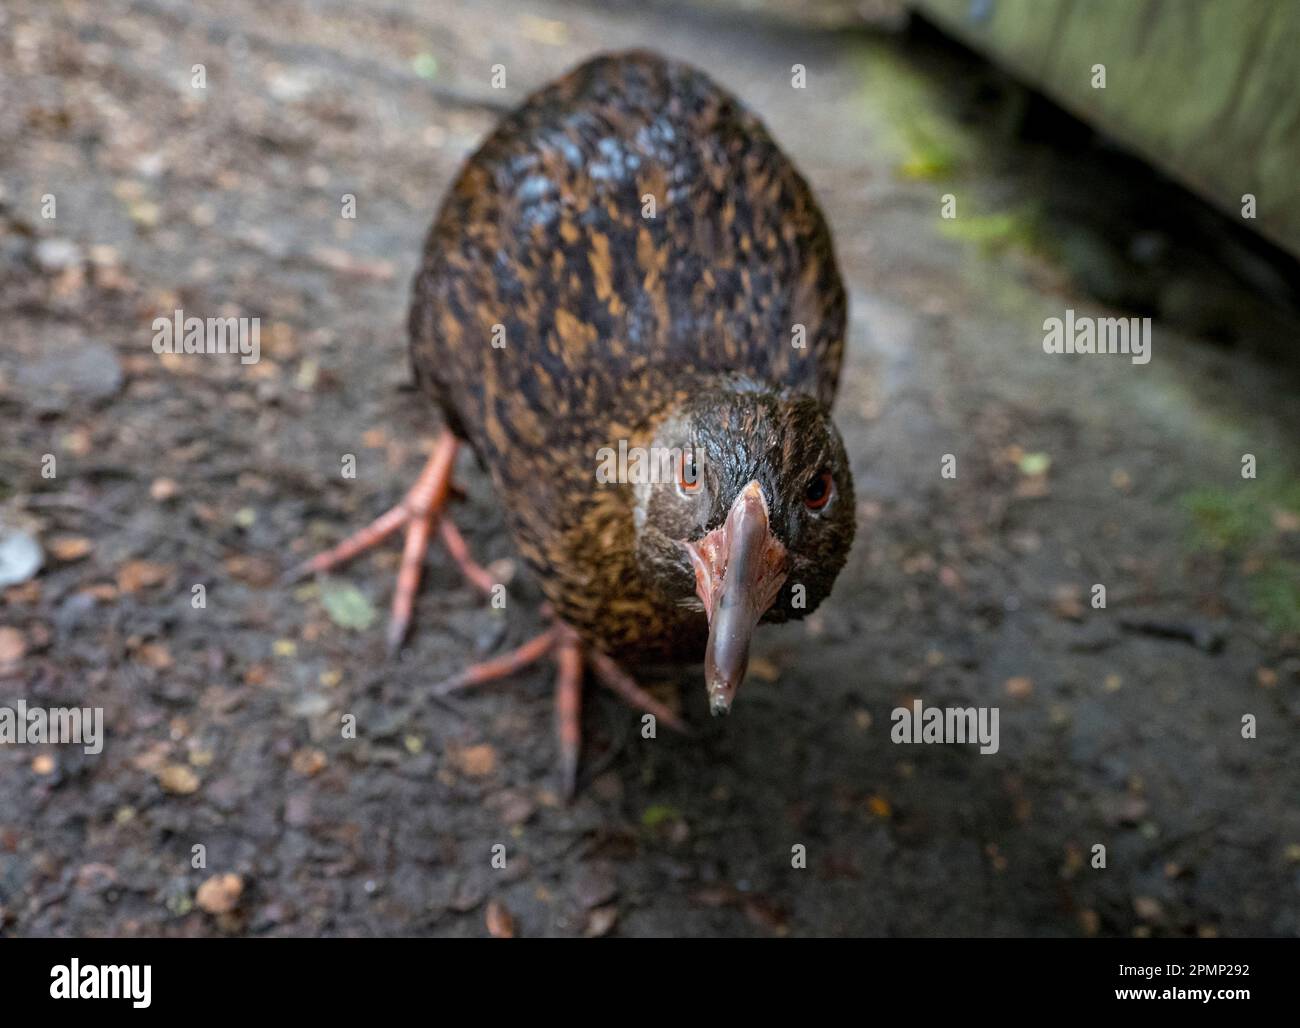 Adult Weka (Gallirallus australis), an endemic flightless bird, at a wildlife rescue shelter; Milford Sound, Milford Track, South Island, New Zealand Stock Photo